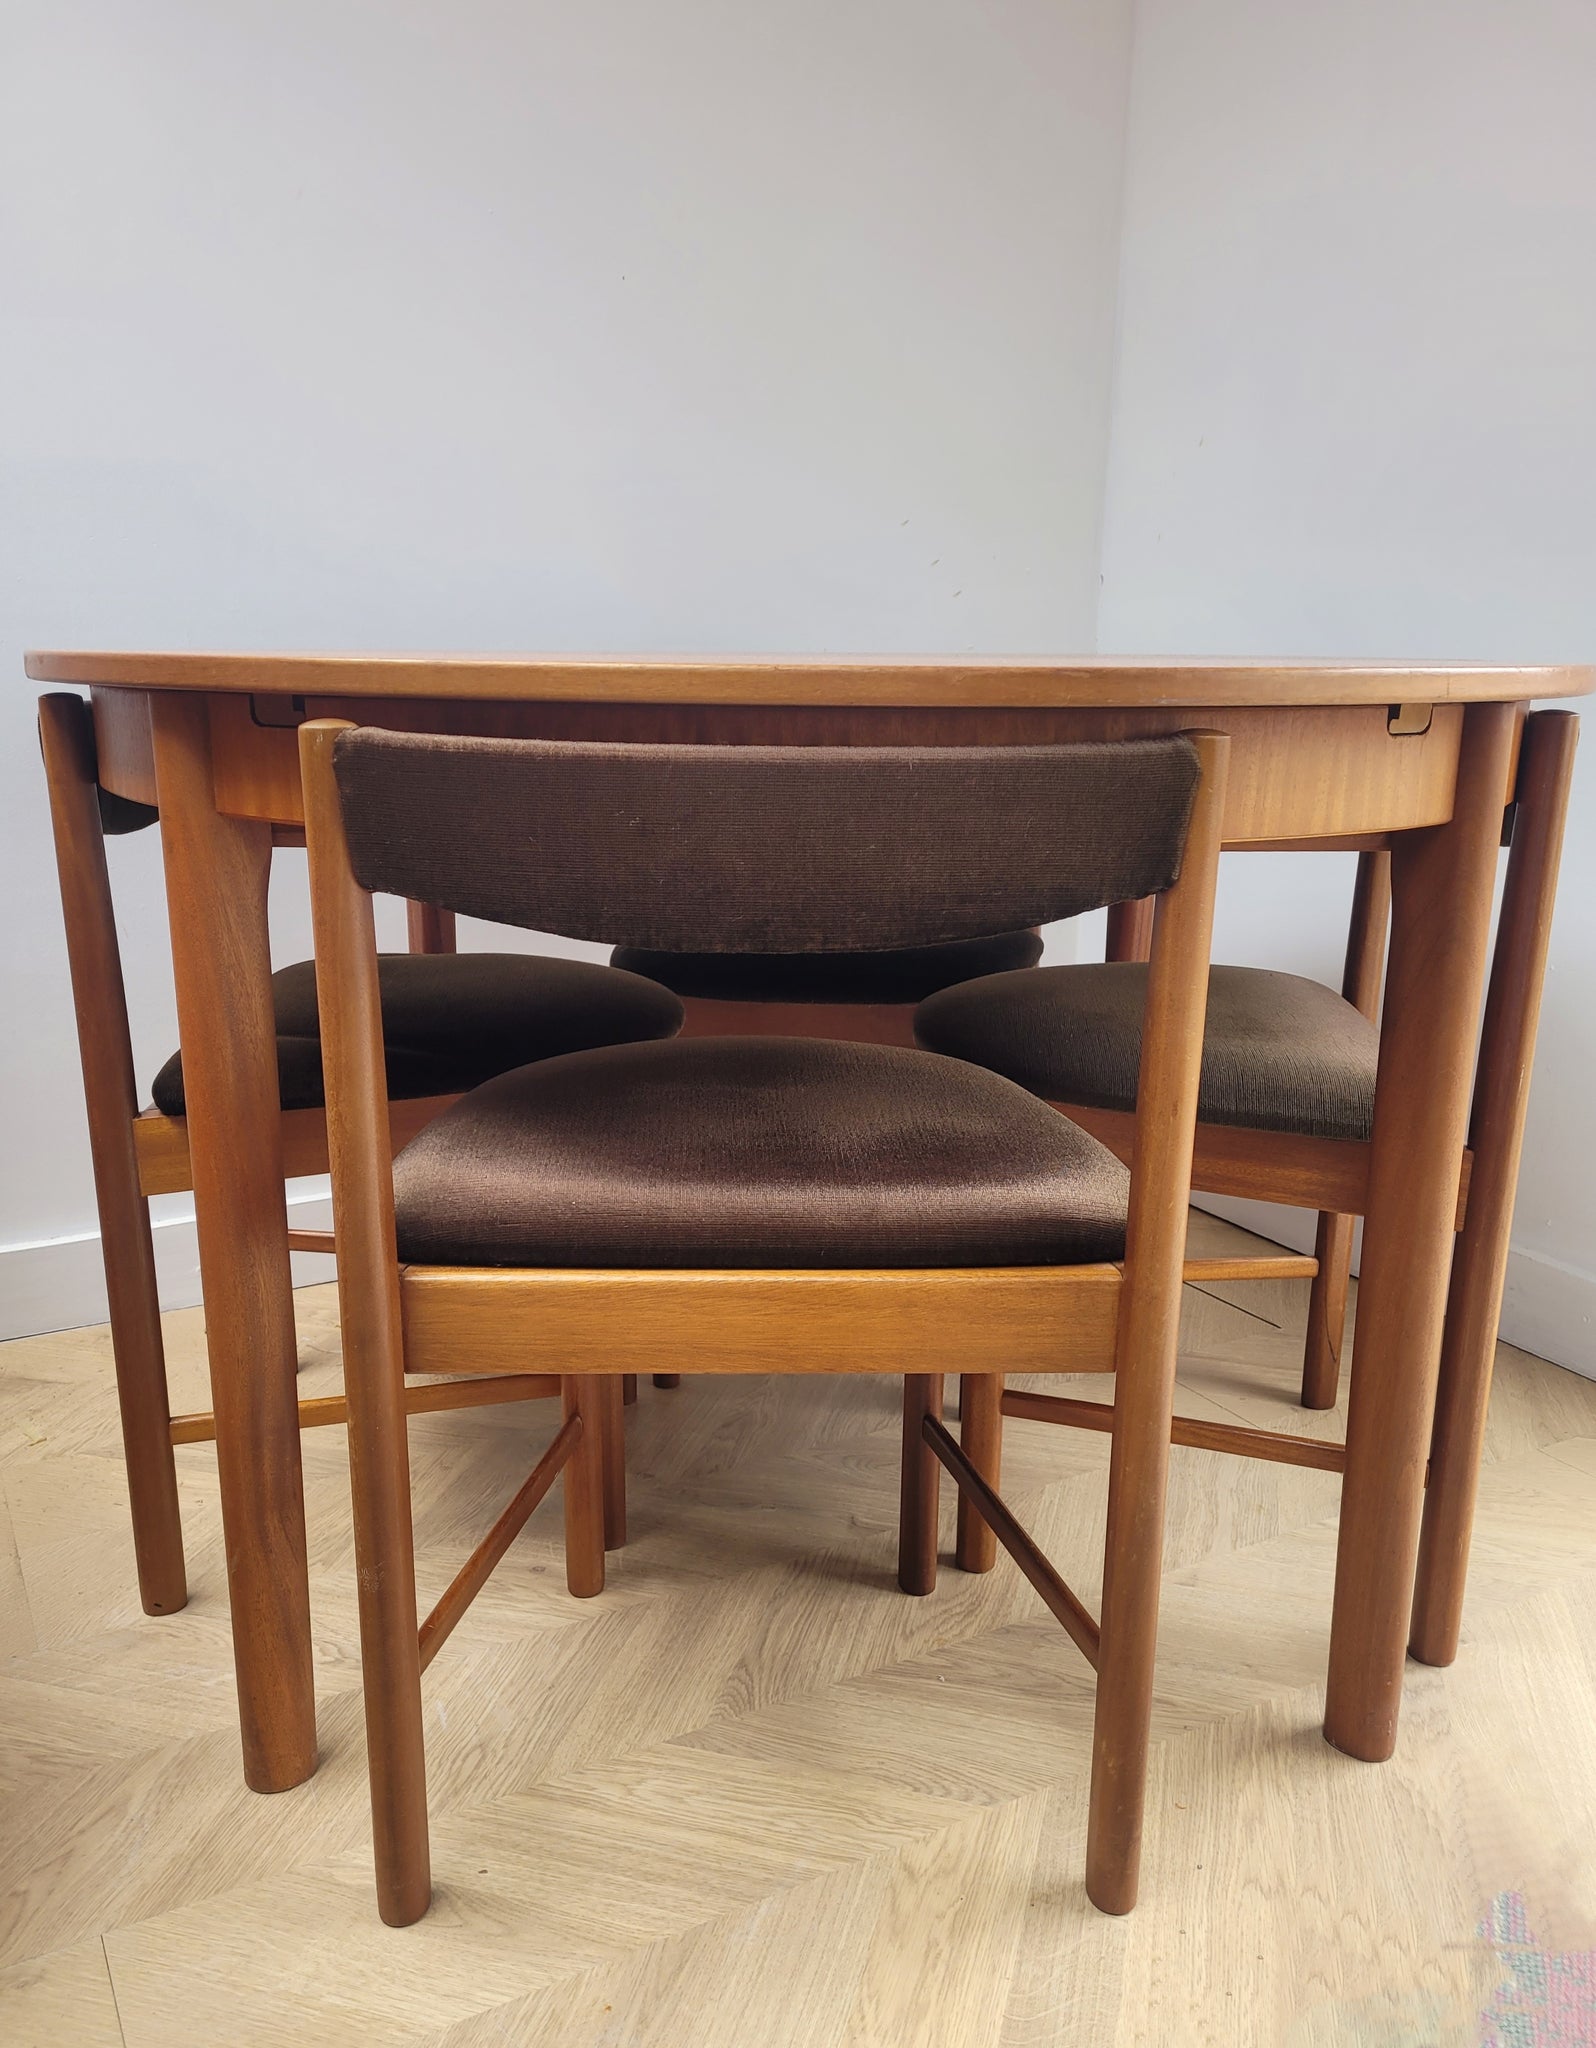 McIntosh Dining table & chairs